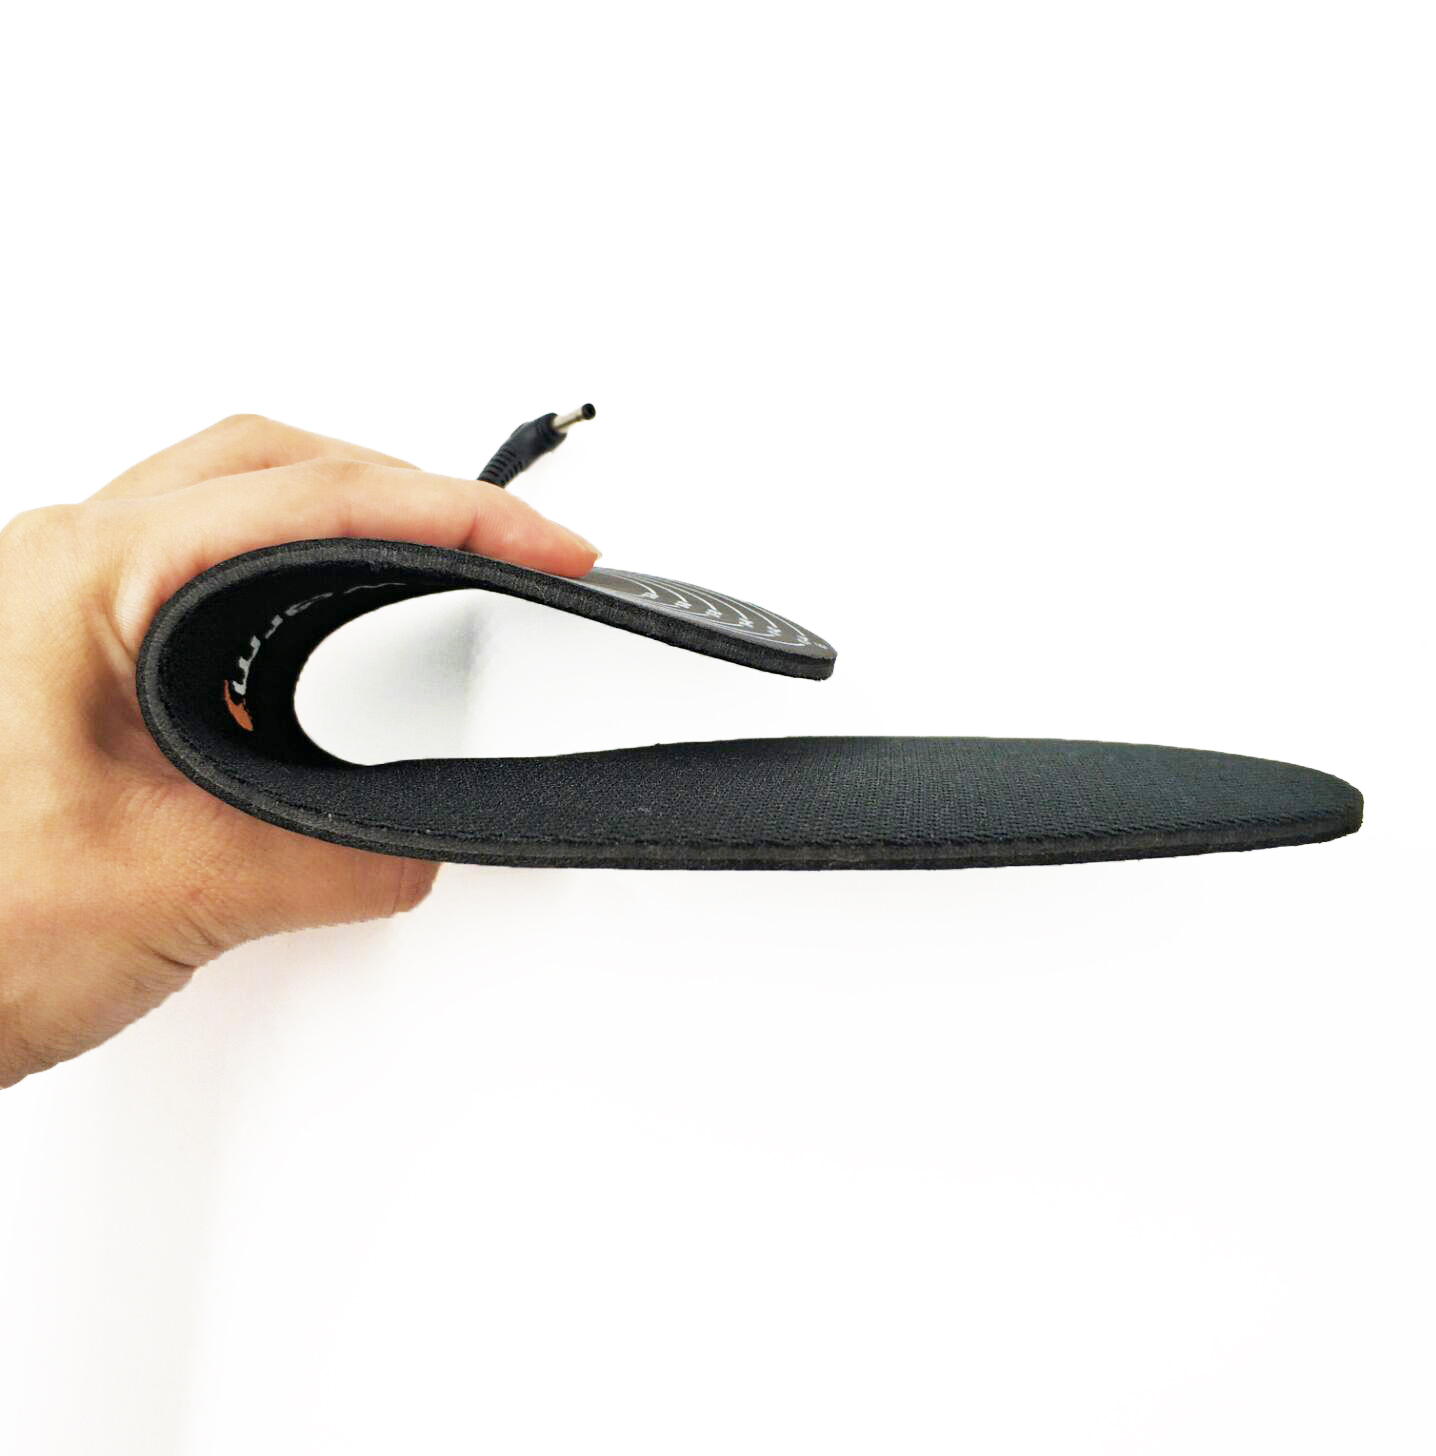 S-King-heated insoles ,electric heated shoe insoles | S-King-1